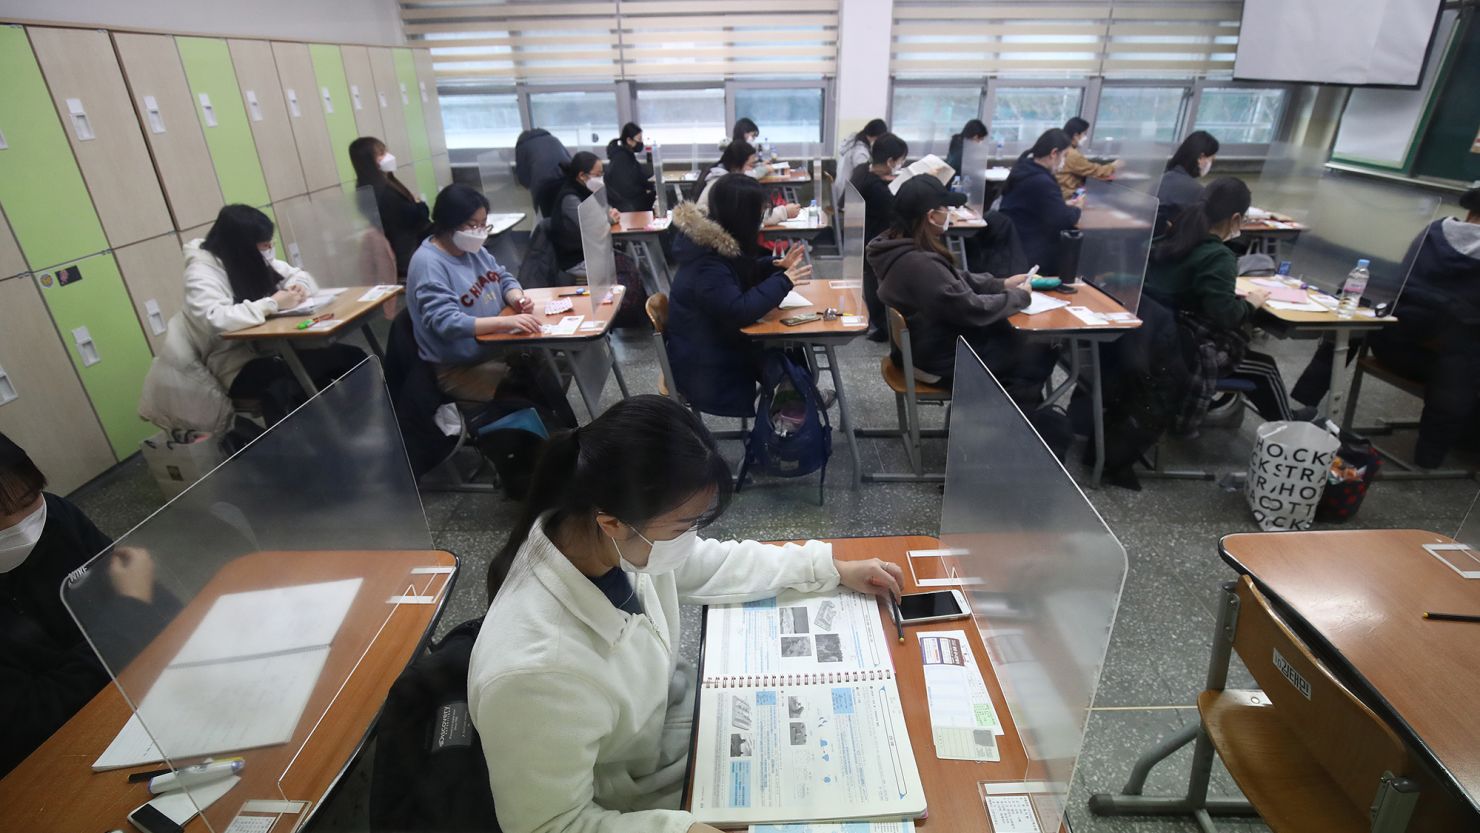 South Korean students take their college entrance exam at a school amid the coronavirus pandemic on December 3, 2020 in Seoul, South Korea. 